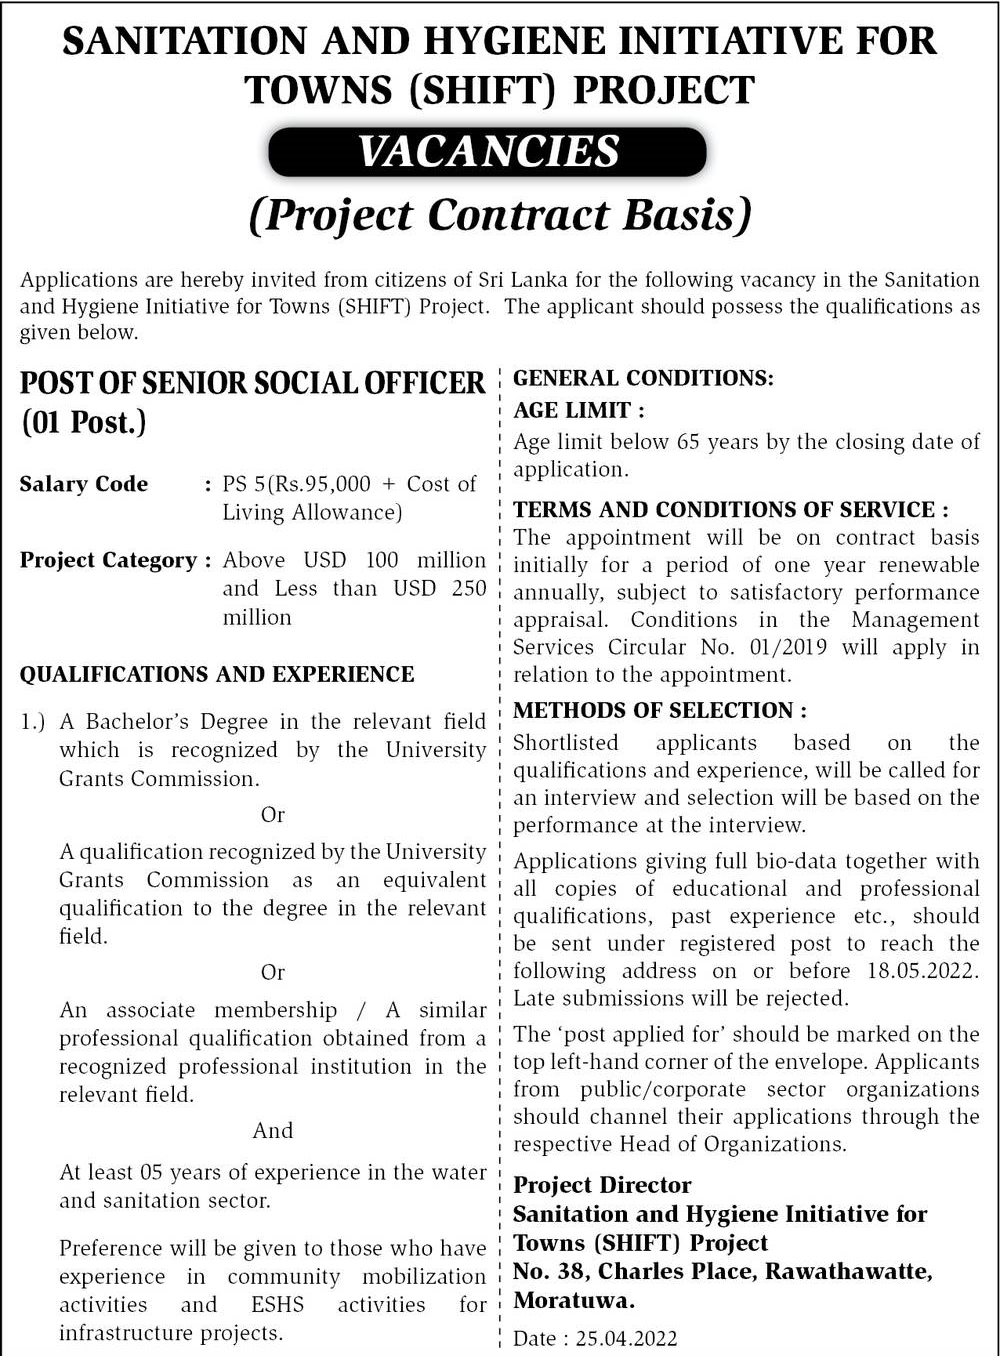 Sanitation and Hygiene Initiative For Towns Project Jobs Vacancies in English